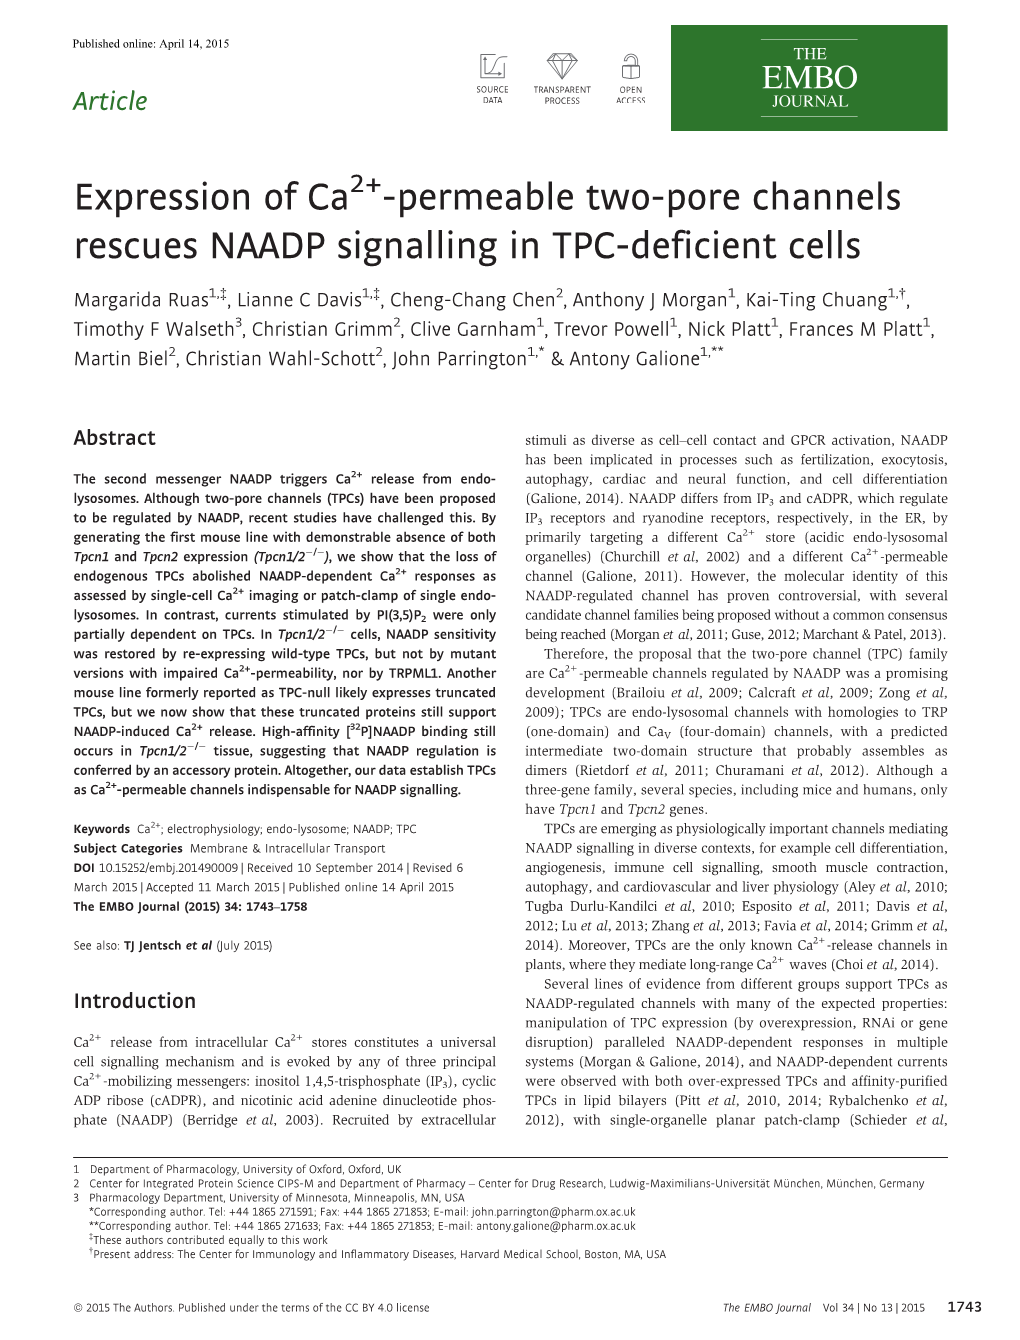 Expression of Ca2permeable Twopore Channels Rescues NAADP